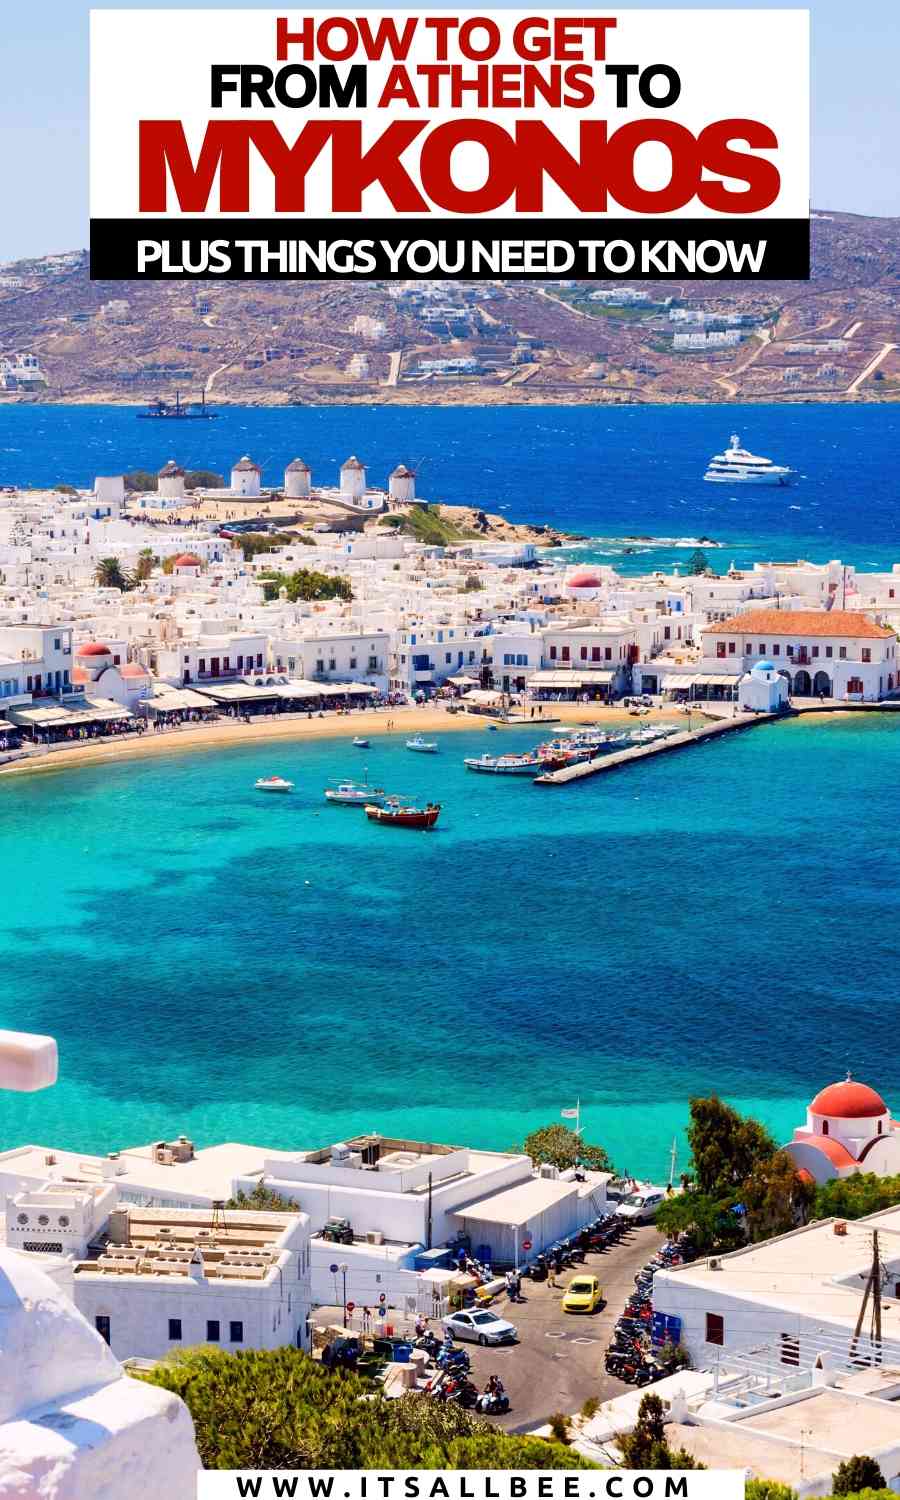 How to get from athens to Mykonos